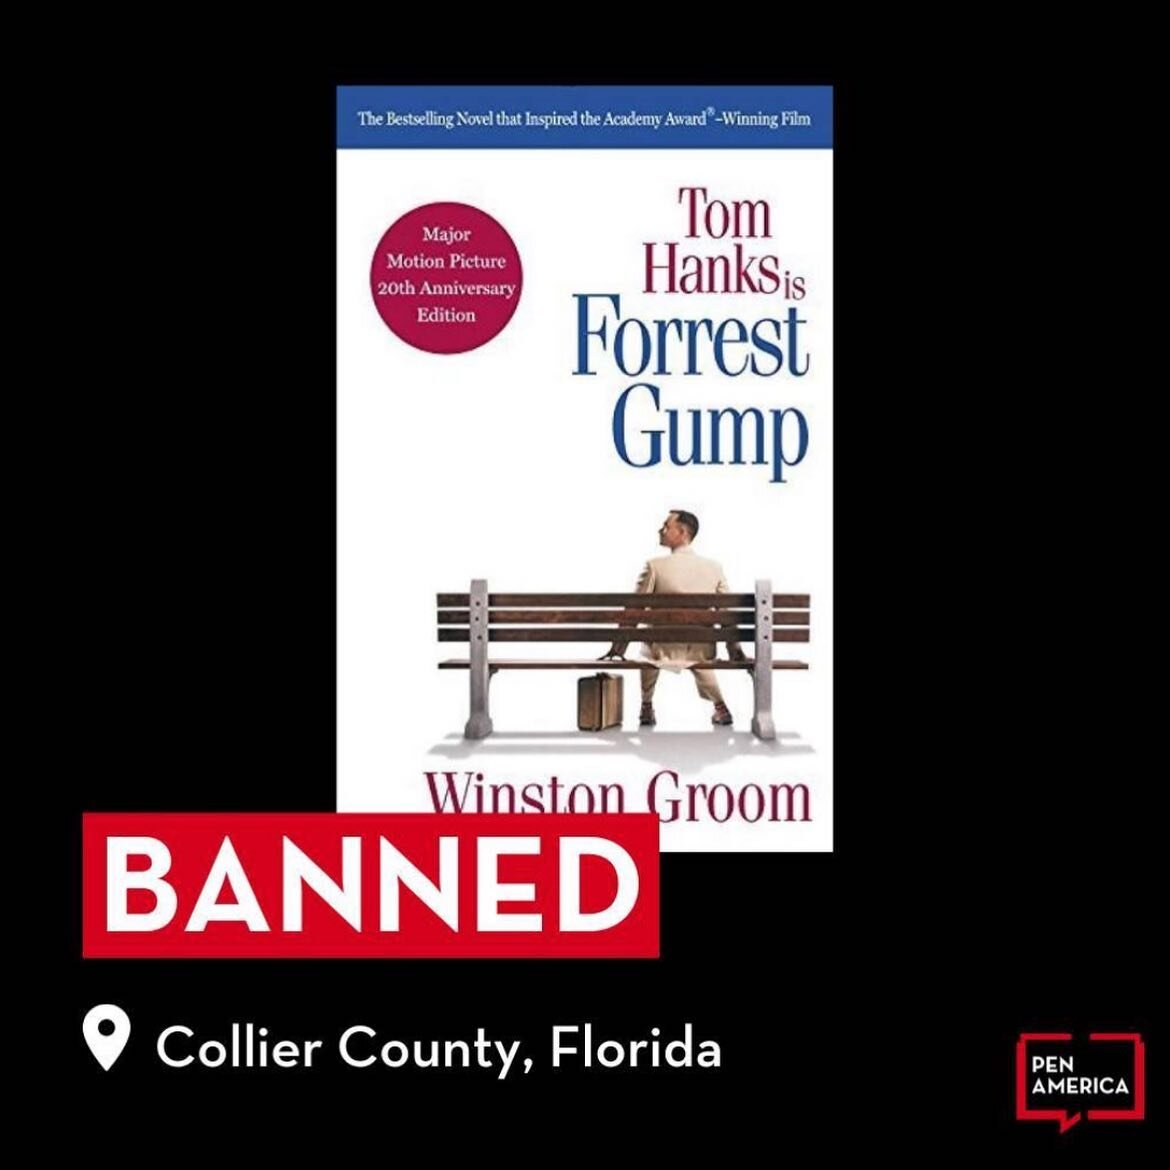 Did you know that books like Forrest Gump and Dune have been banned by school systems in the USA? Join us Nov 16, 6pm @theblueroomnashville patio to discuss and READ banned books. 
&bull;
&bull;

Repost from @penamerica - In Collier County, FL more t